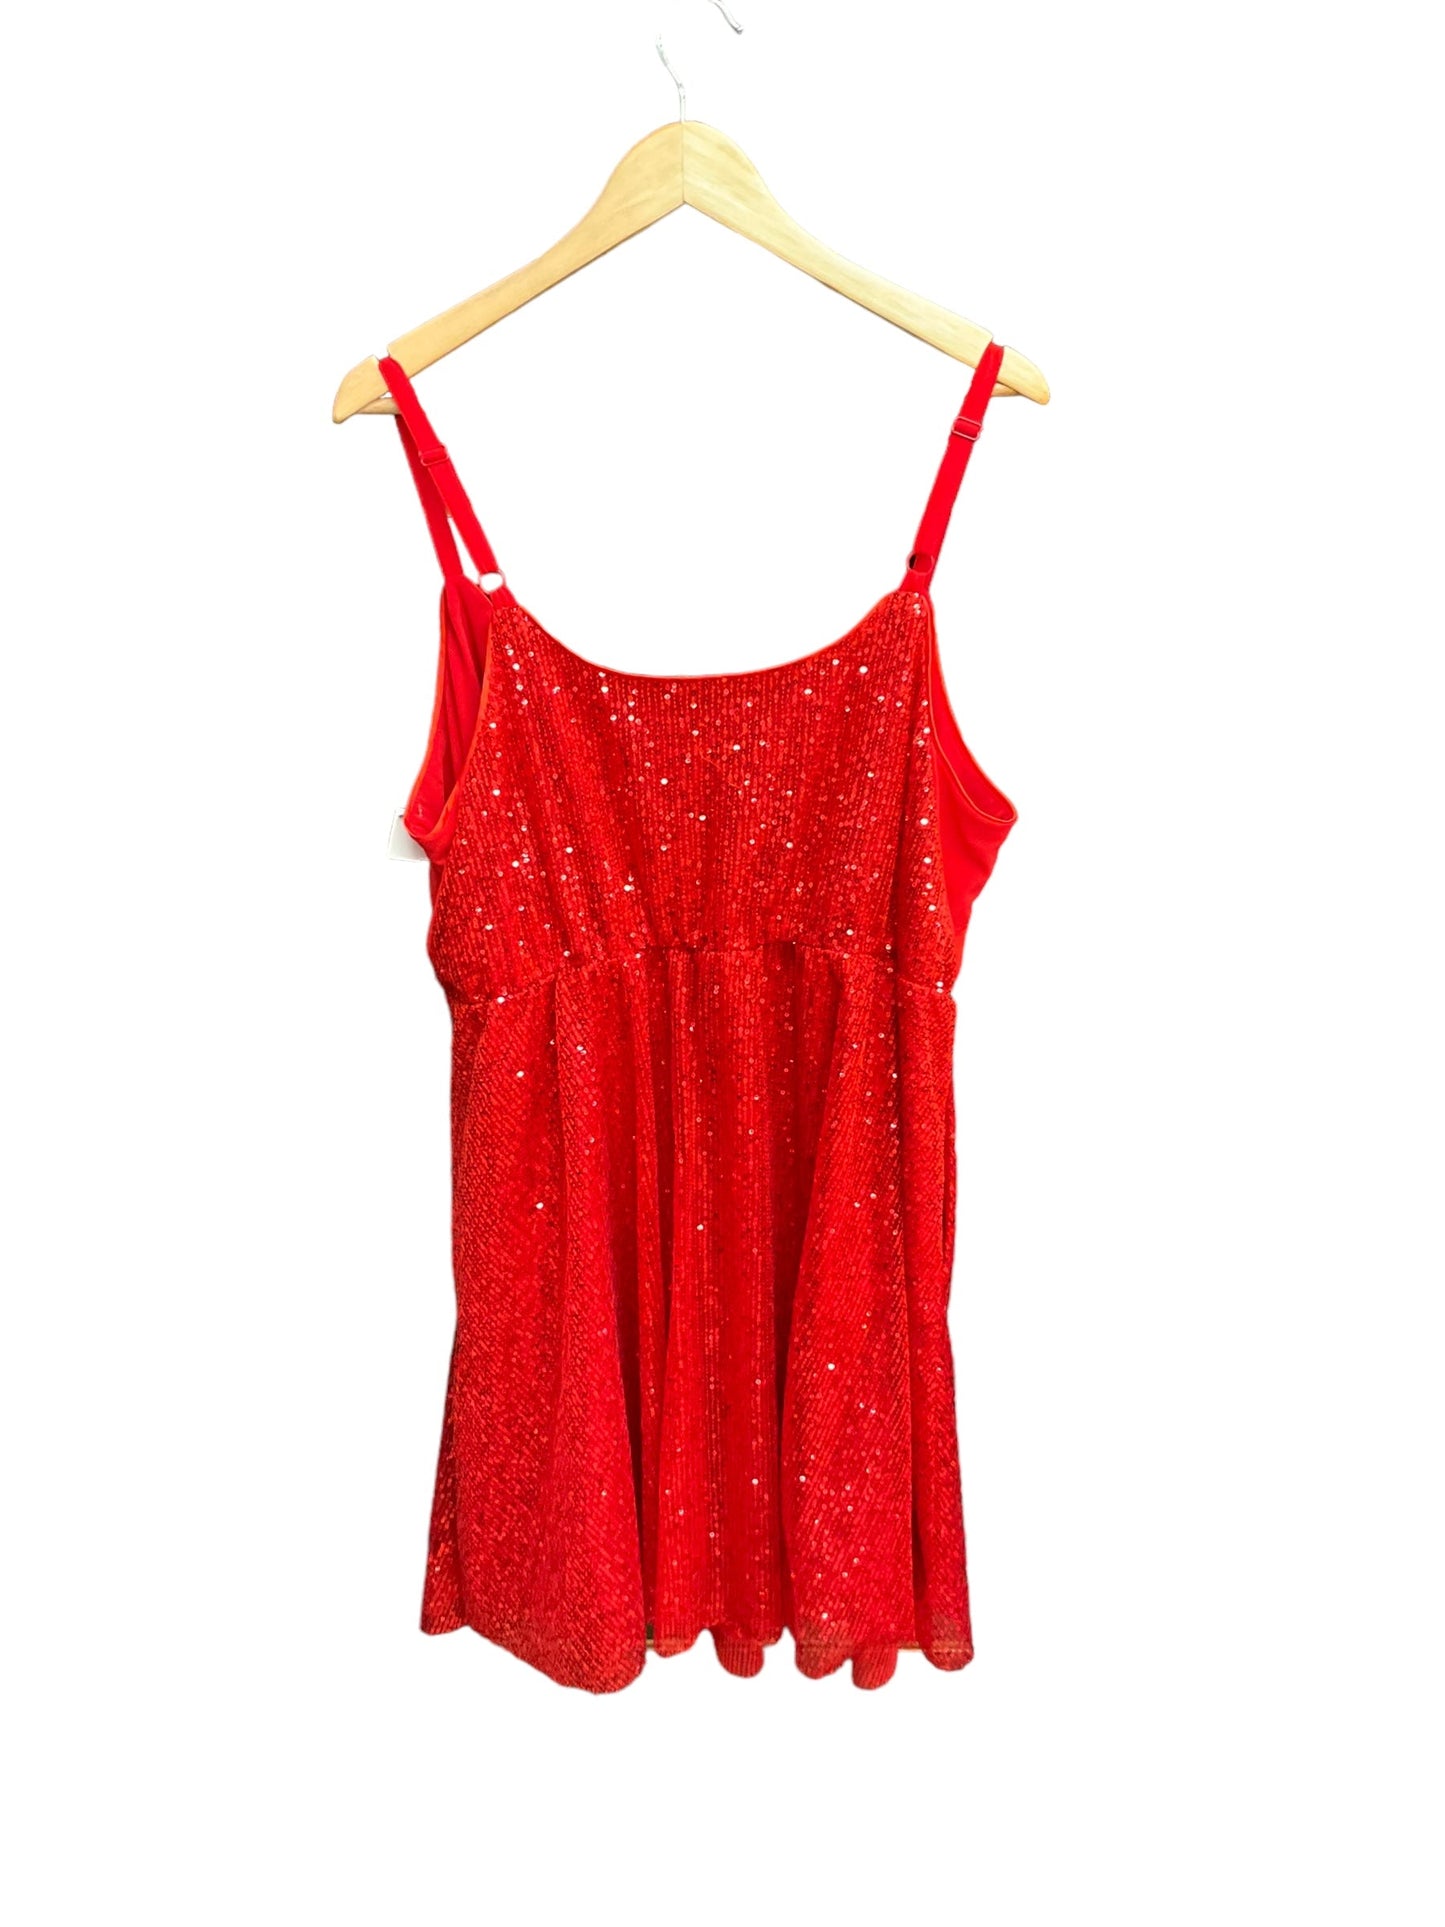 Red Dress Casual Short Torrid, Size 1x